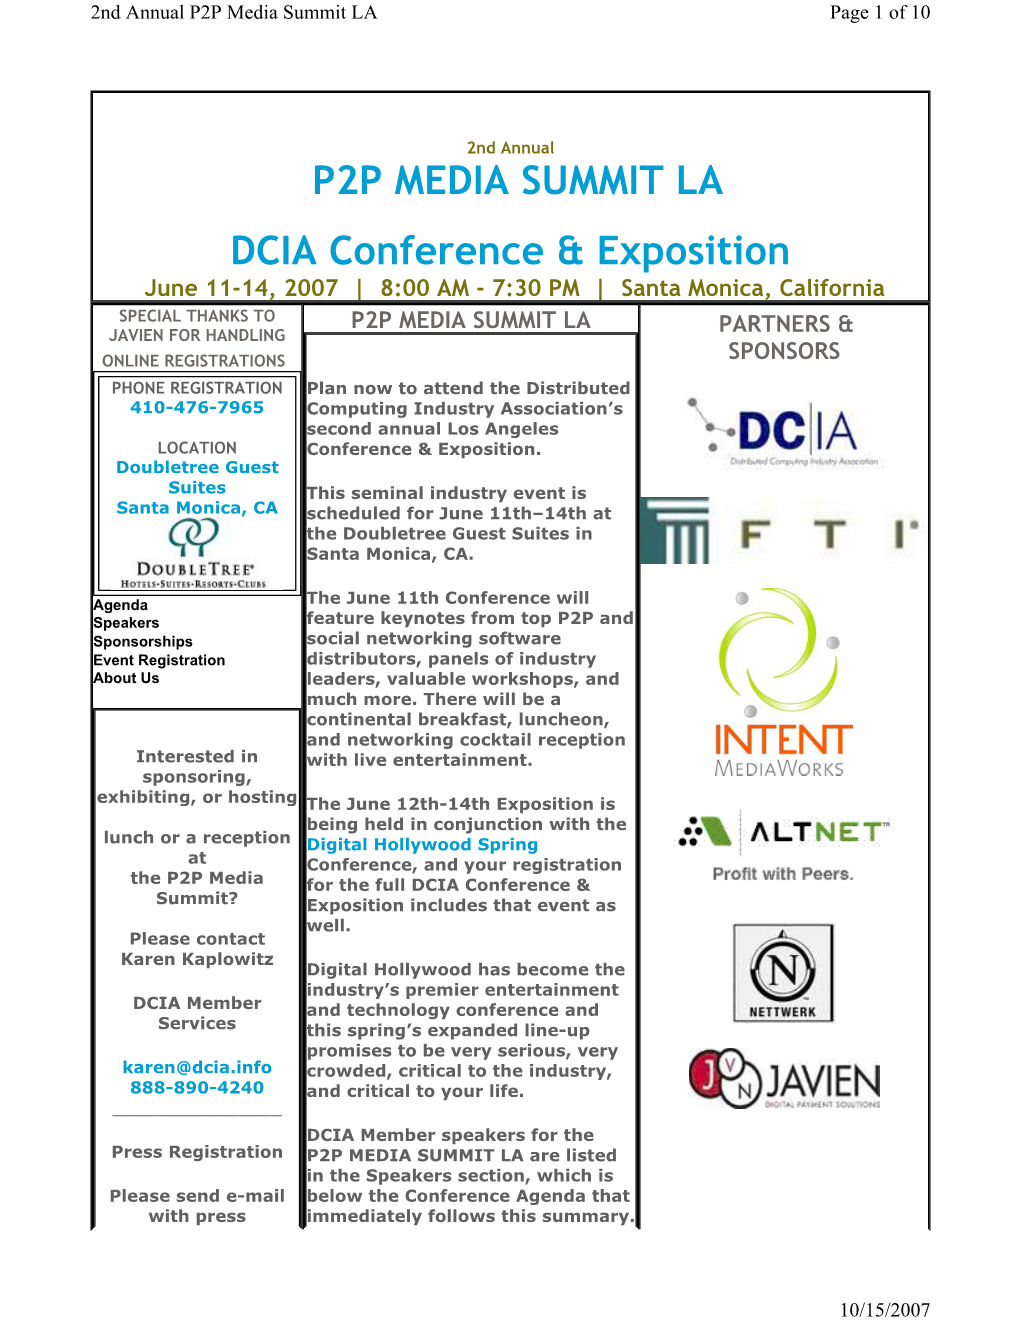 Digital Hollywood Spring at Conference, and Your Registration the P2P Media for the Full DCIA Conference &